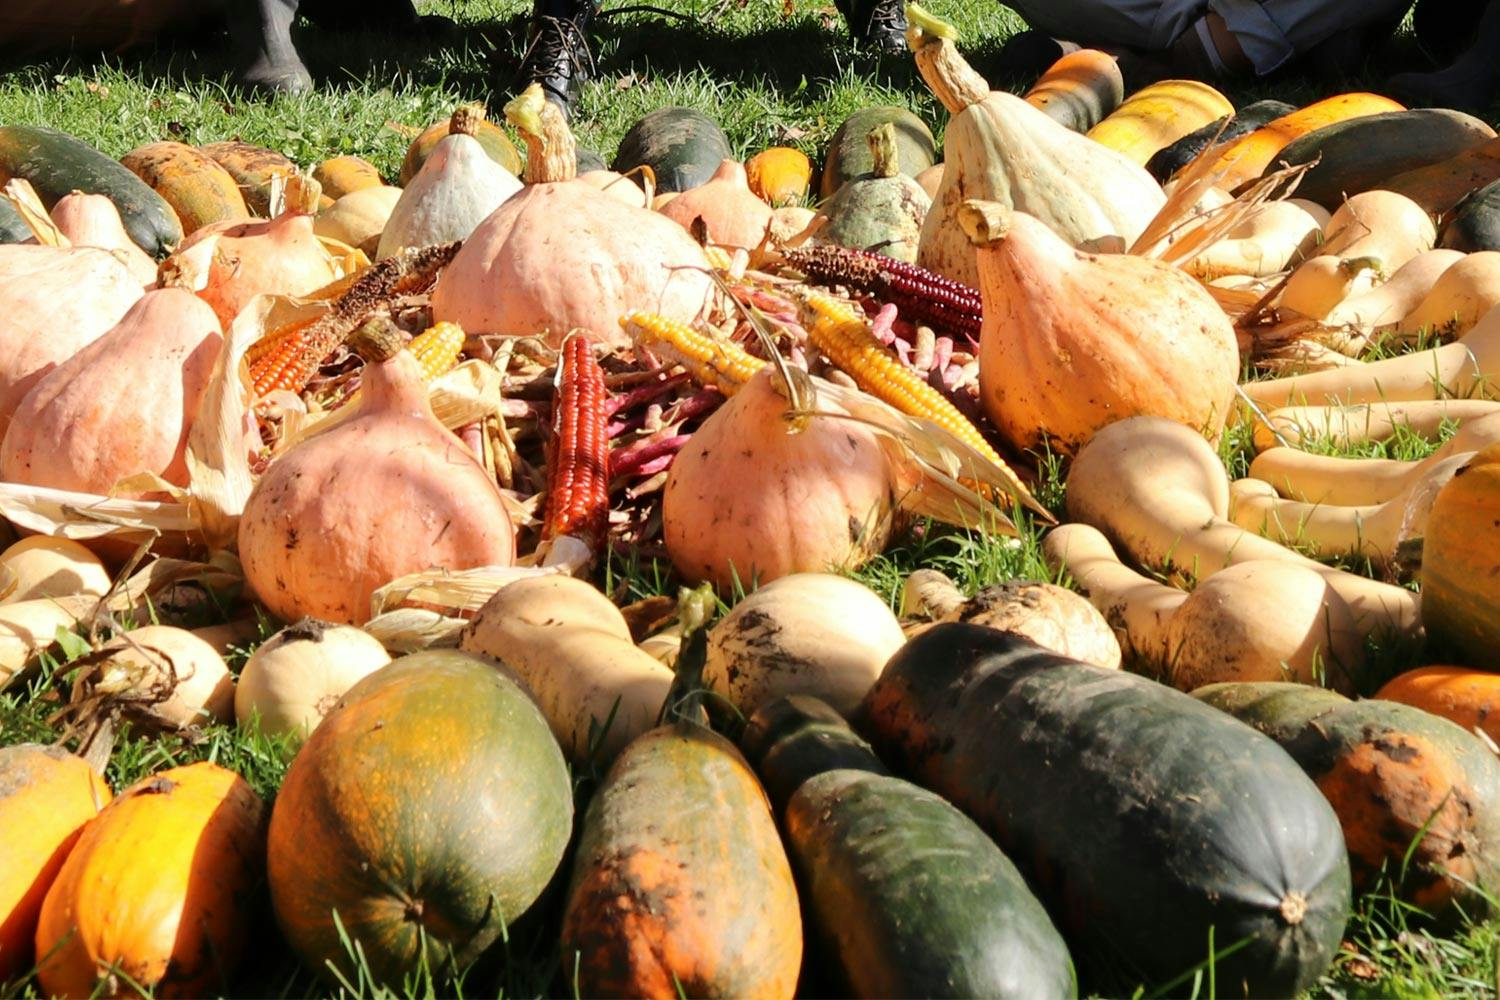 Corn, beans, and squash of various shapes in shades of yellow, orange and green in a circular pile on grass-covered ground.